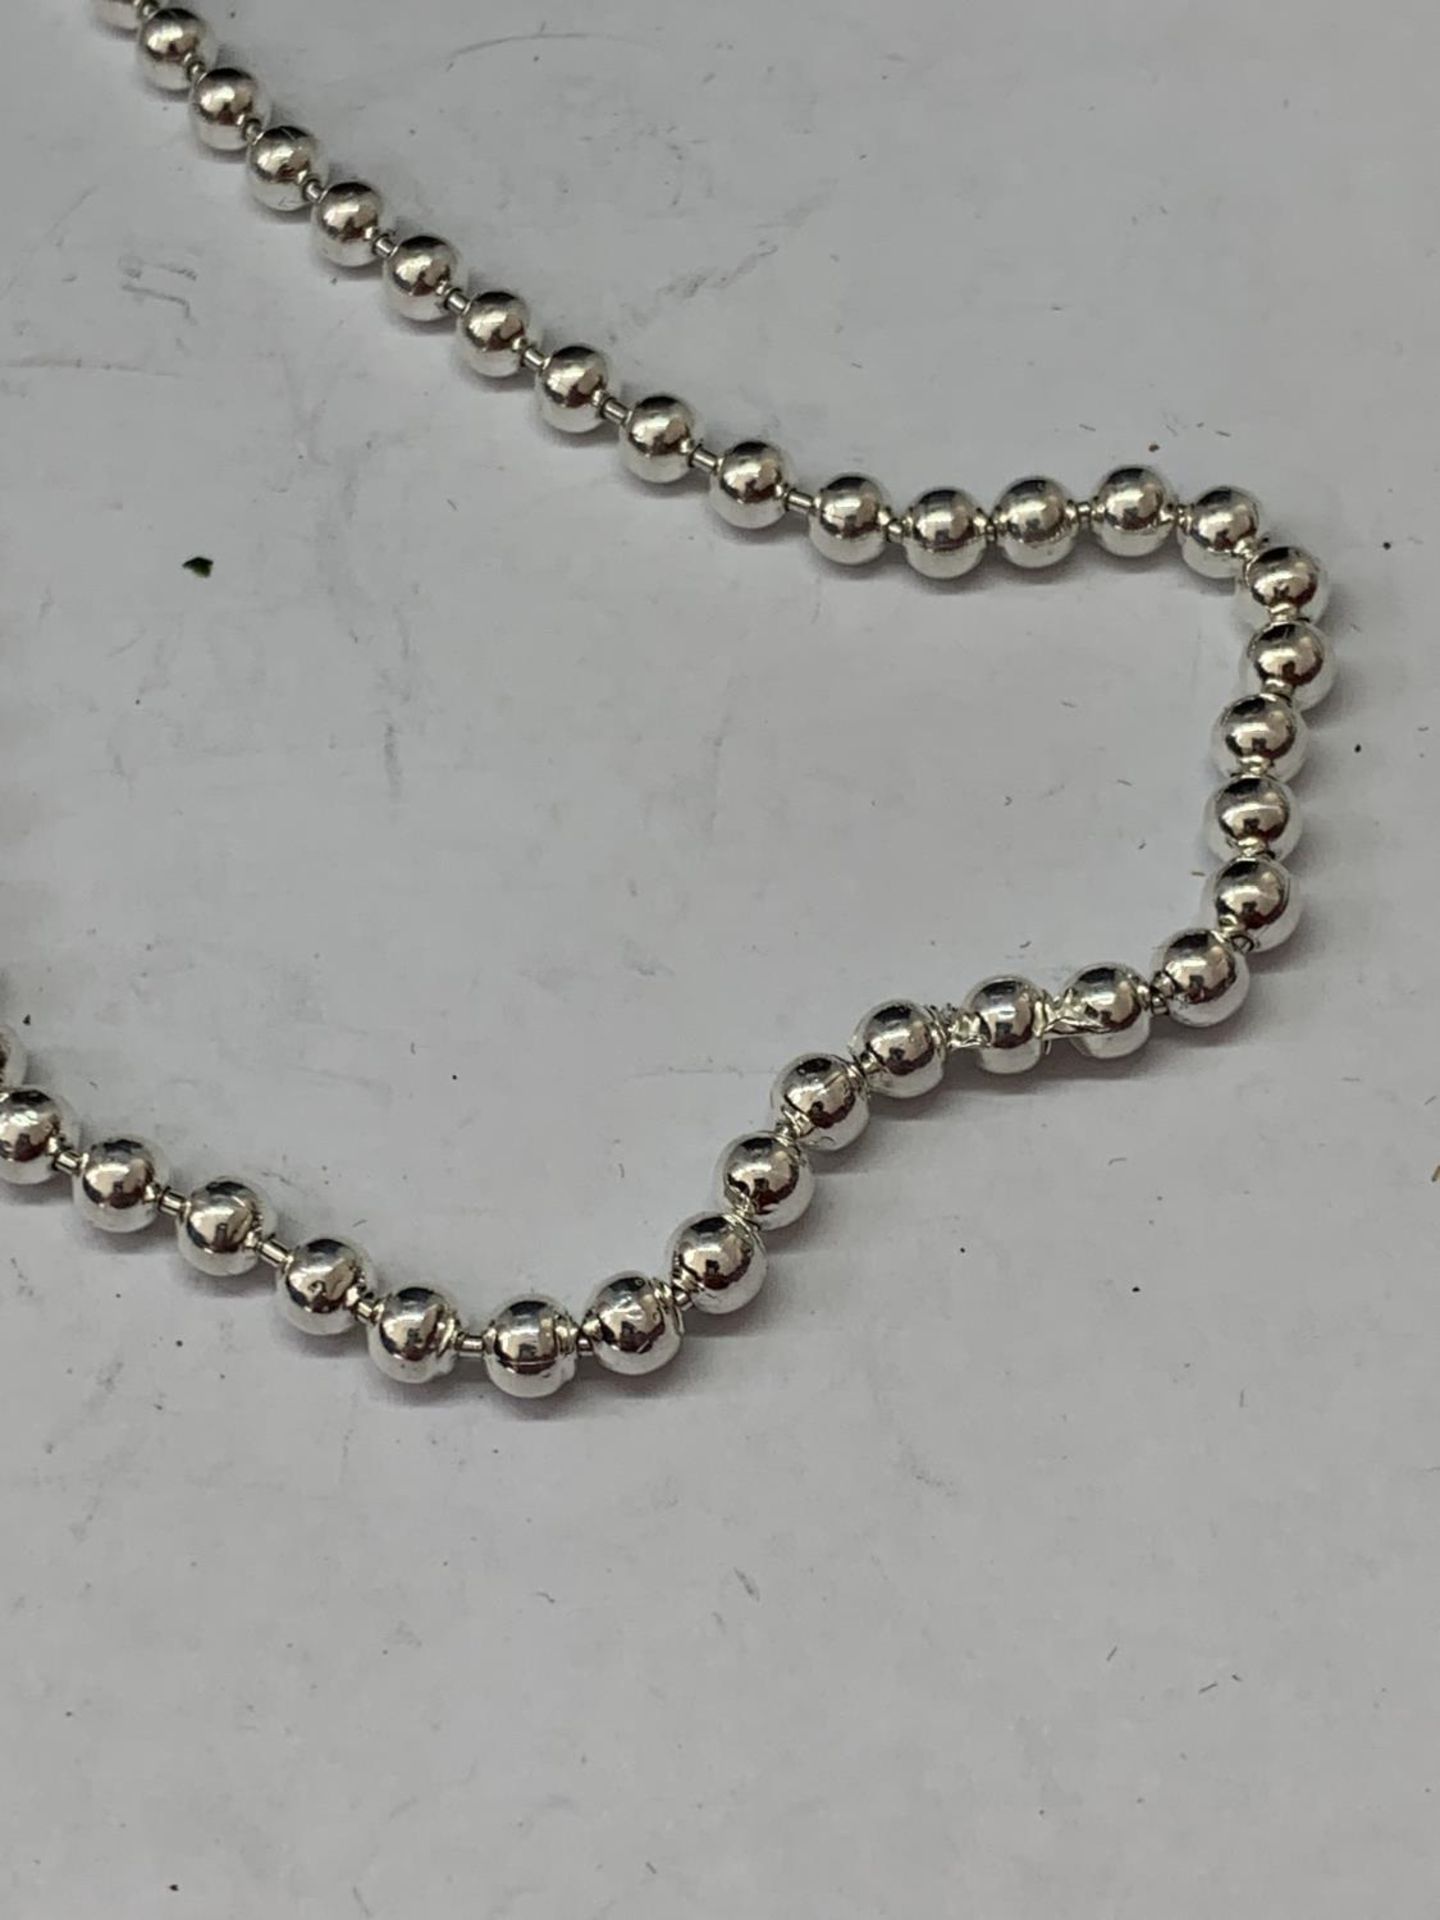 A SILVER T BAR NECKLACE - Image 3 of 3